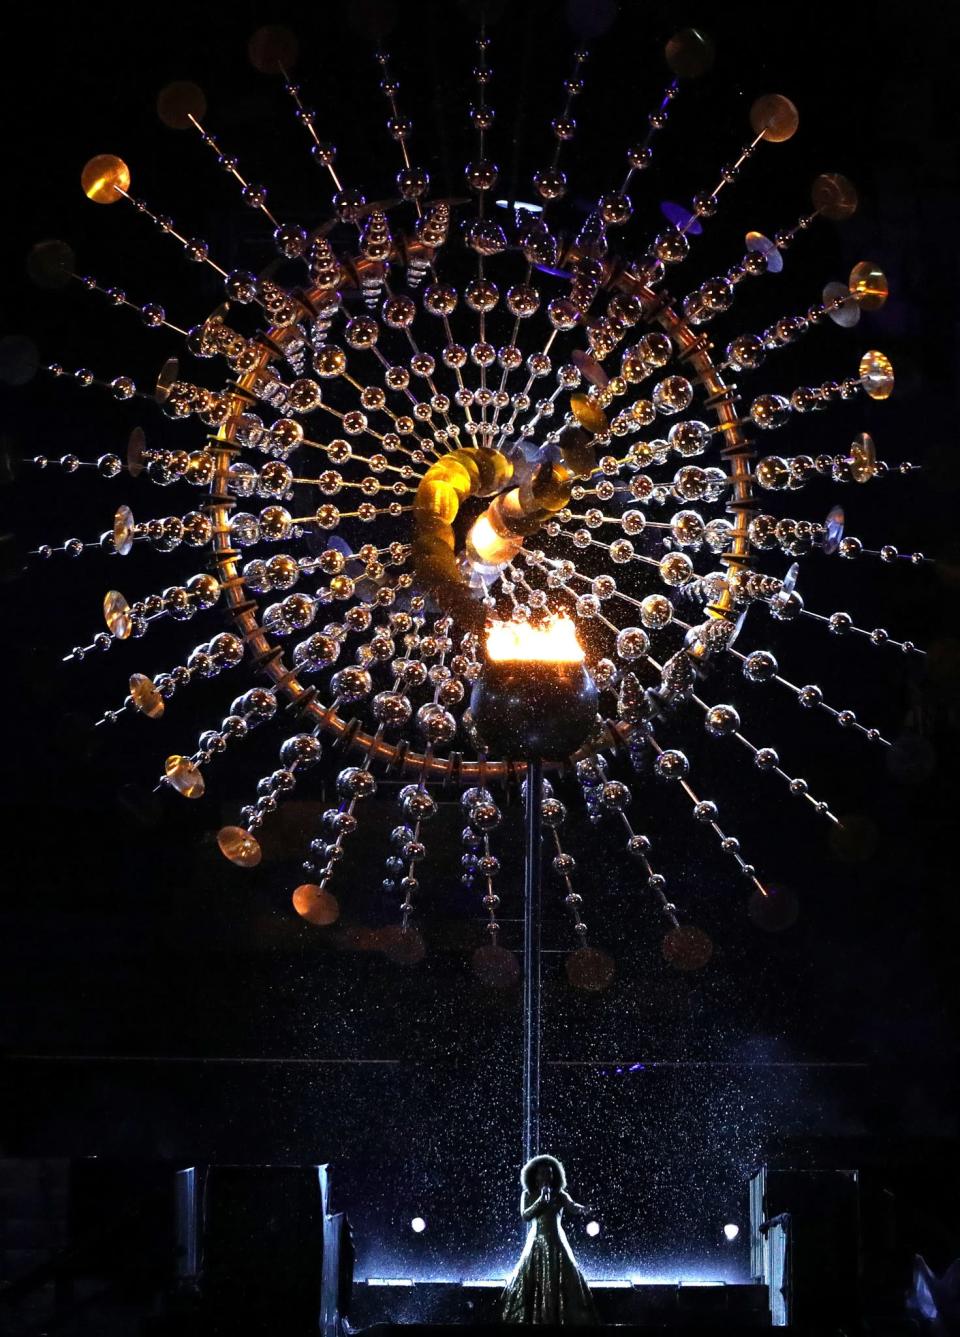 <p>Singer Mariene de Castro performs in front of the Olympic Cauldron while the Olympic flame is being extinguished during the Closing Ceremony on Day 16 of the Rio 2016 Olympic Games at Maracana Stadium on August 21, 2016 in Rio de Janeiro, Brazil. (Photo by Patrick Smith/Getty Images) </p>